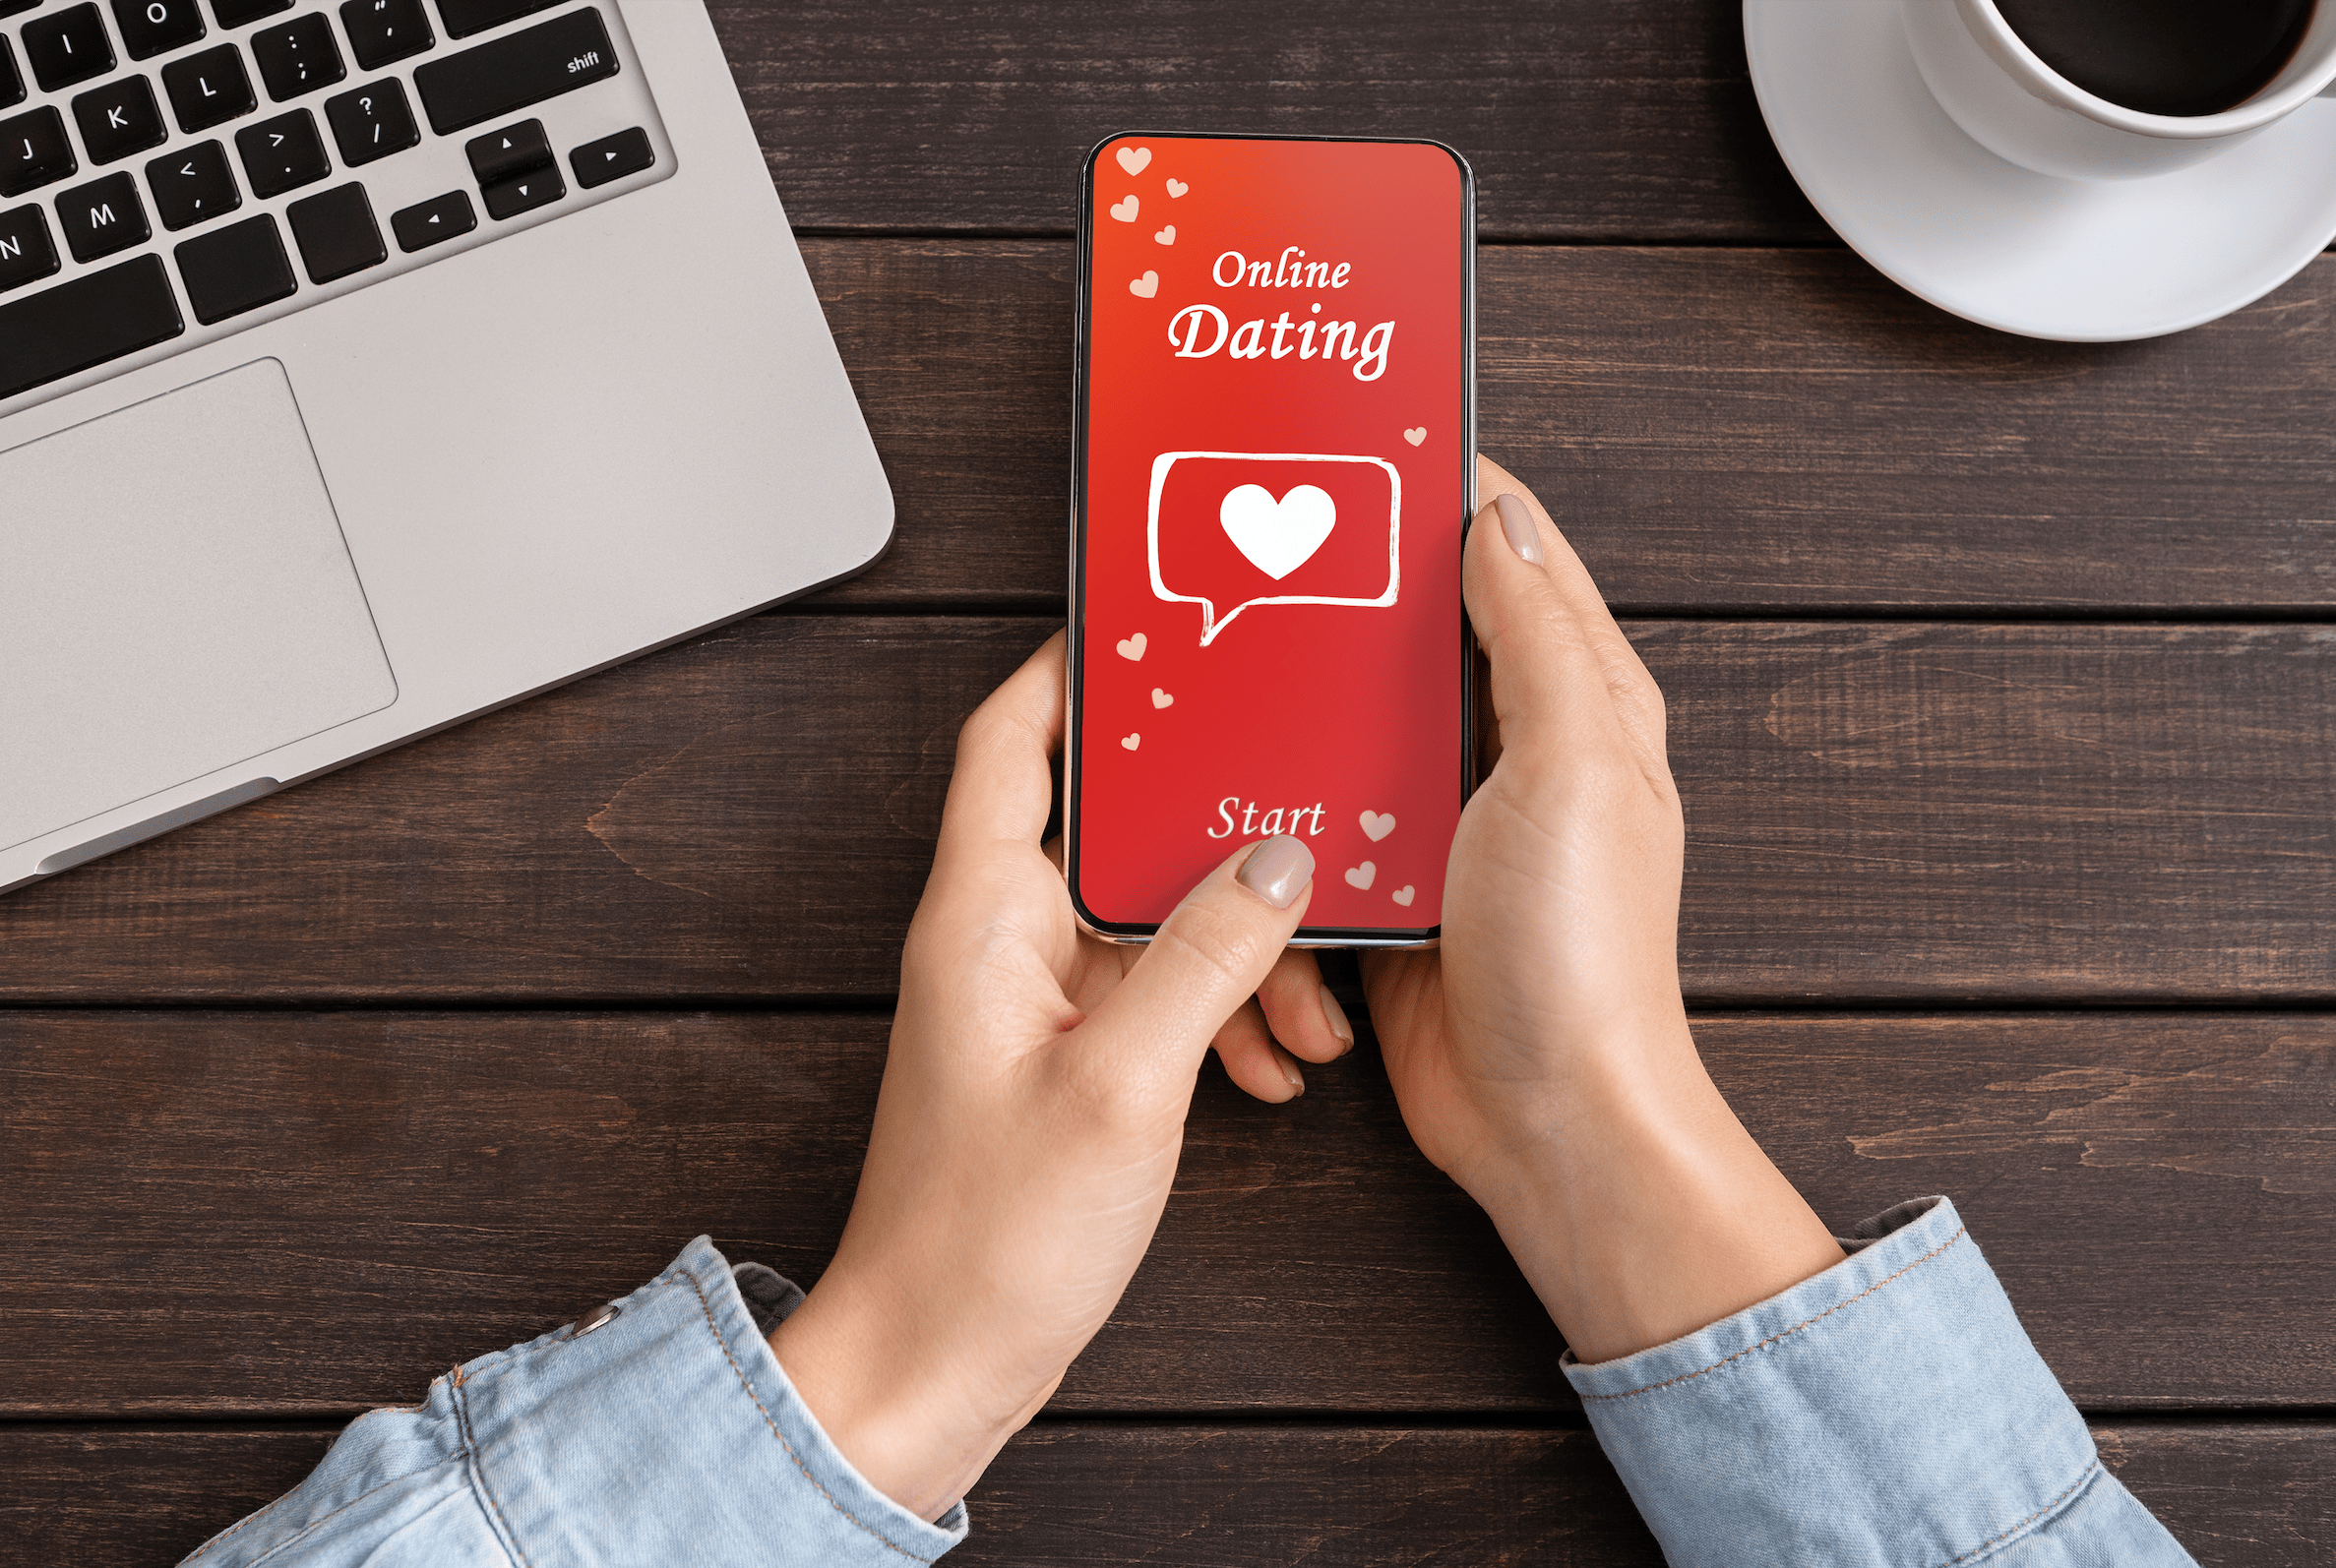 Do dating sites send fake messages?